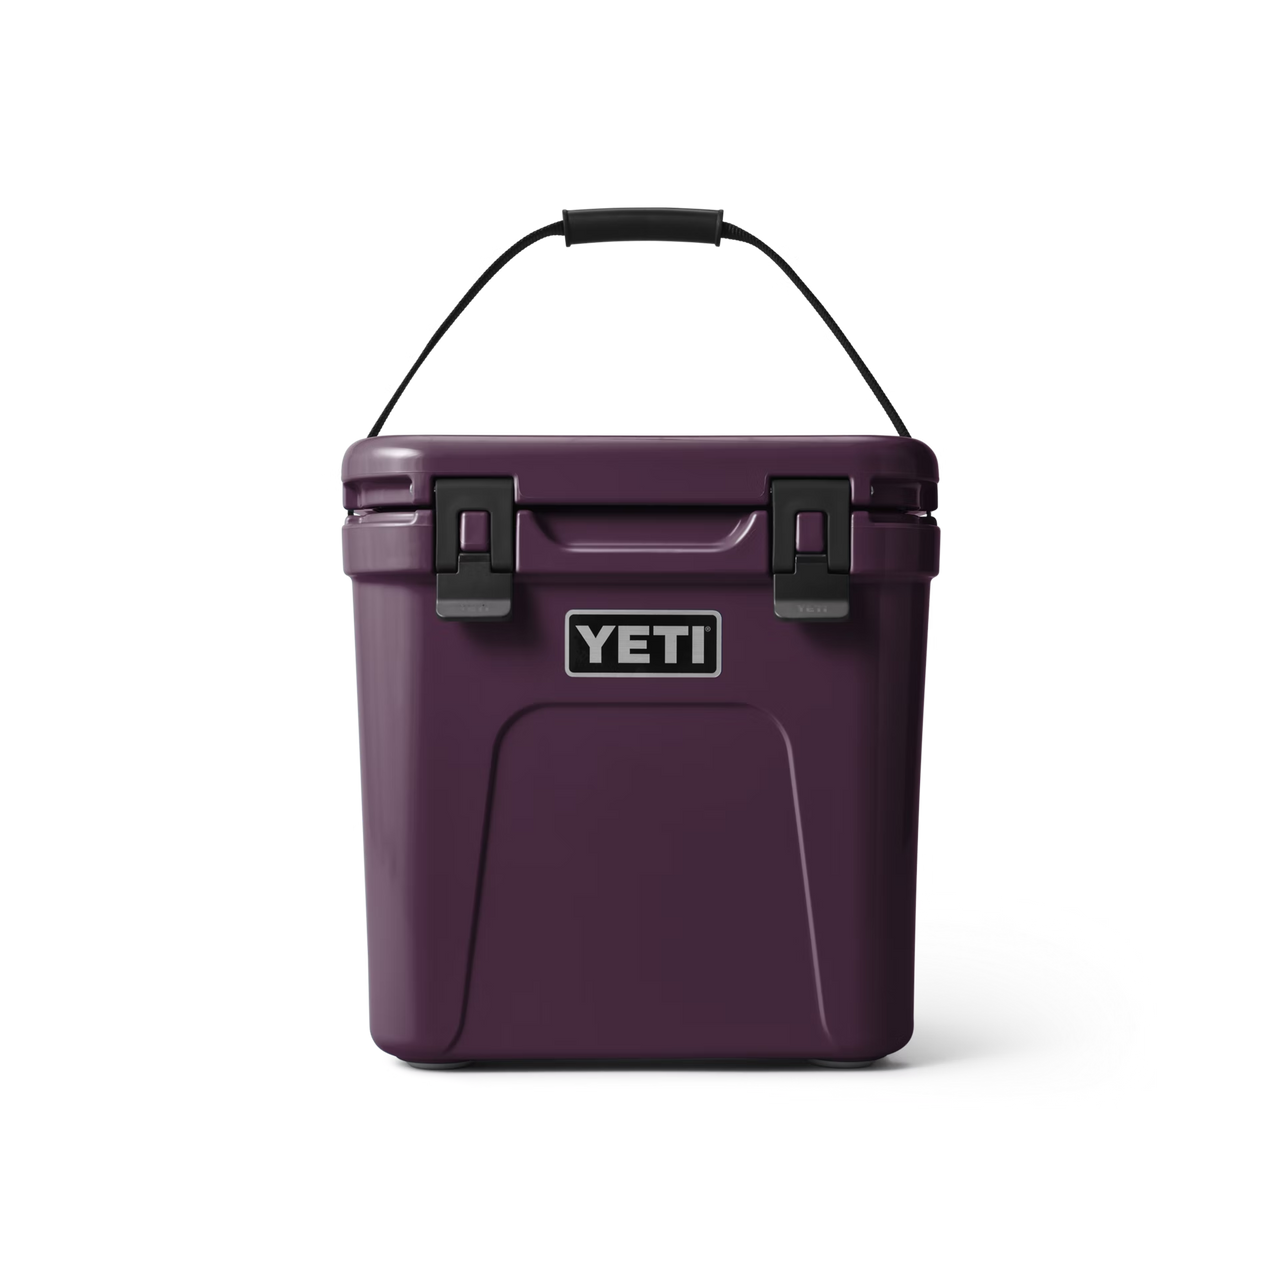 YETI Roadie 24 Nordic Purple 22 qt Hard Cooler And Grizzly 15